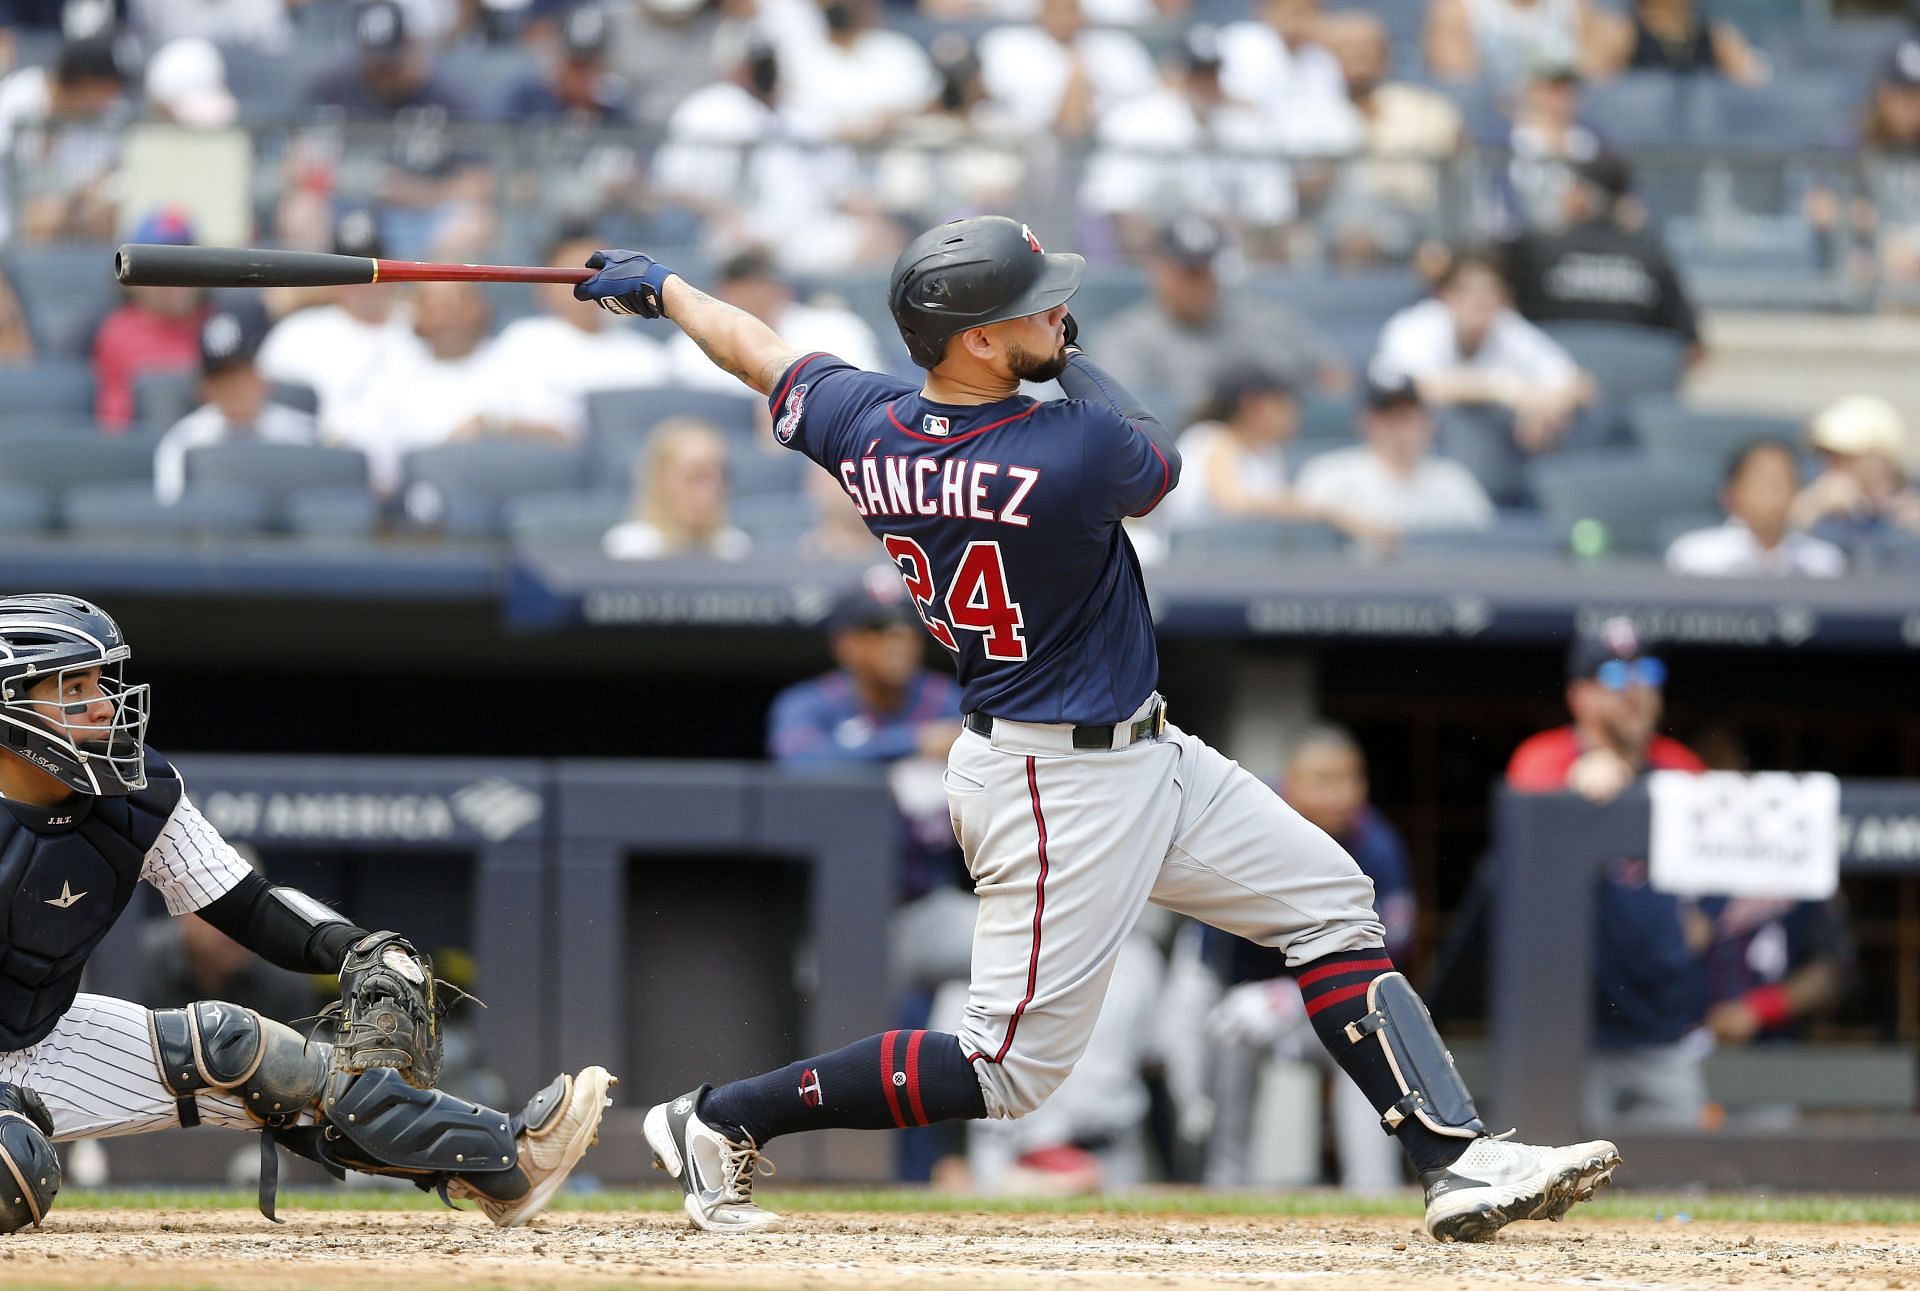 LA Angels: Gary Sanchez could be an option for catcher upgrade